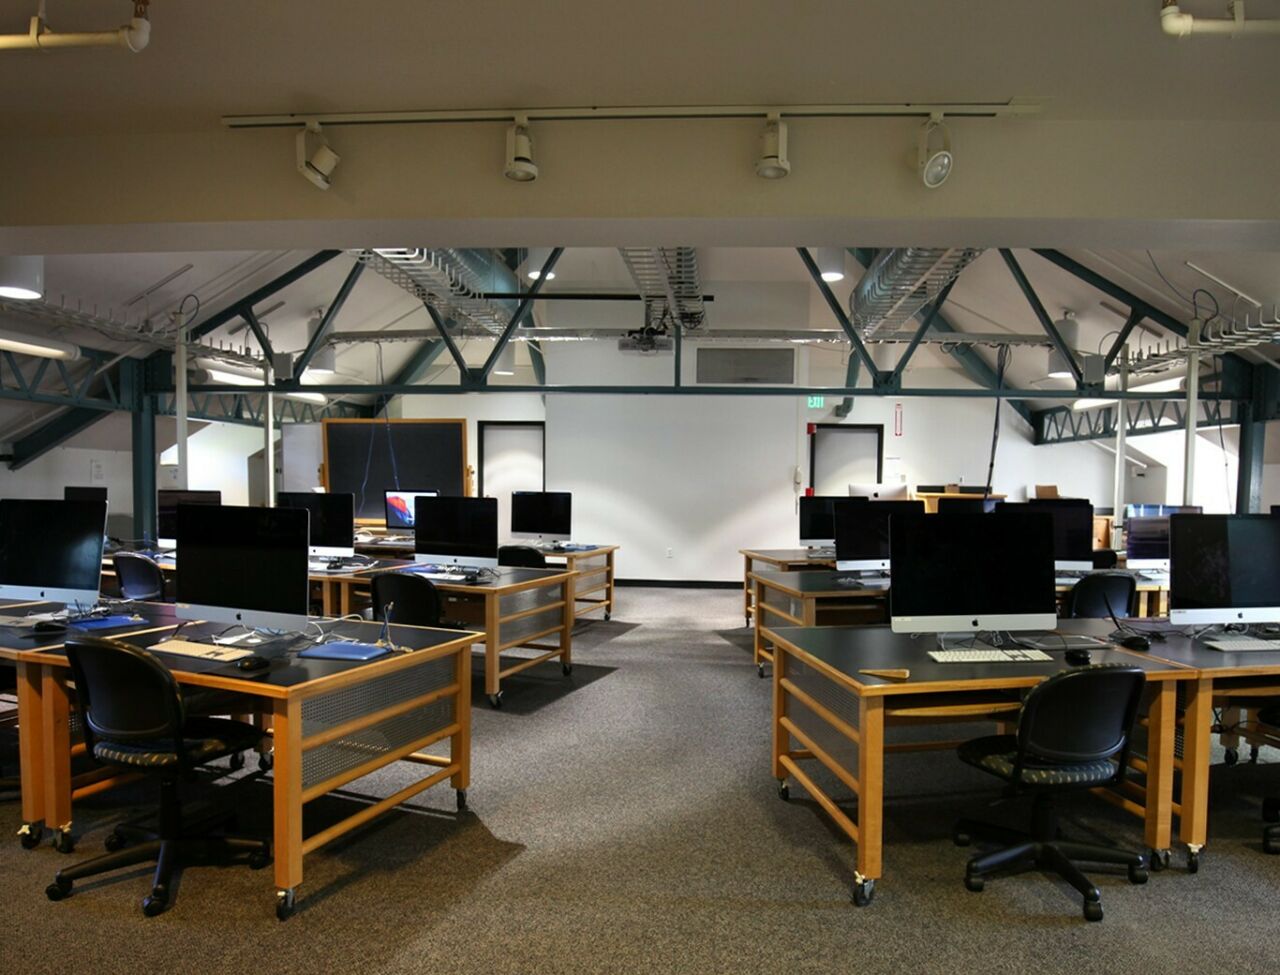 The Digital Arts Design Studio features a state of the art digital media lab offering students a wide variety of instructional space, tools, and equipment to work with.